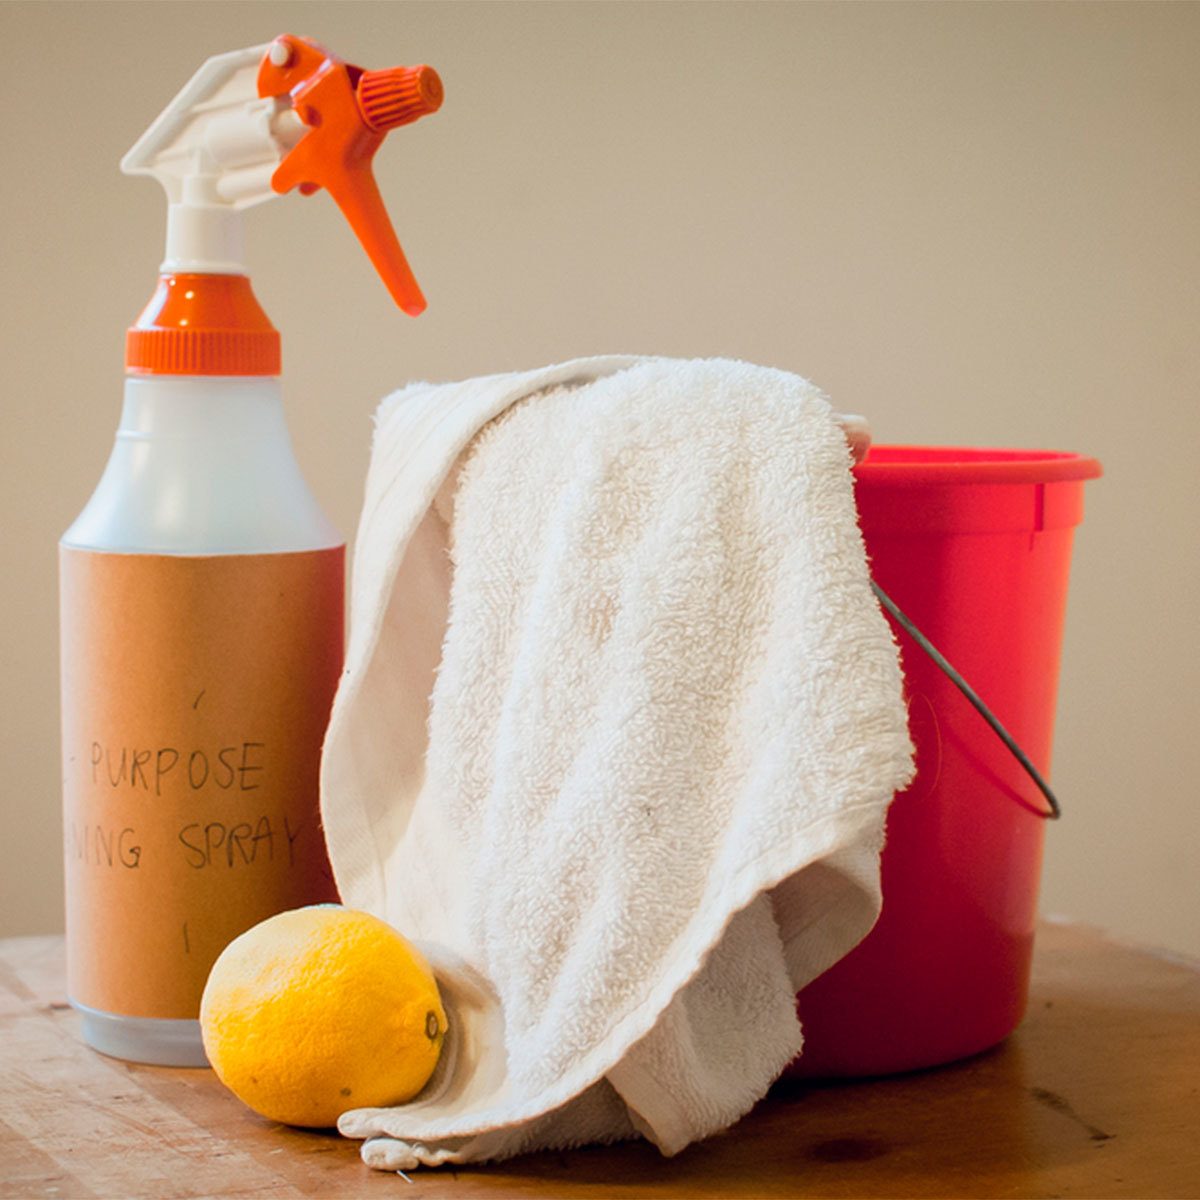 How to Make Homemade Cleaner With Simple Ingredients (DIY